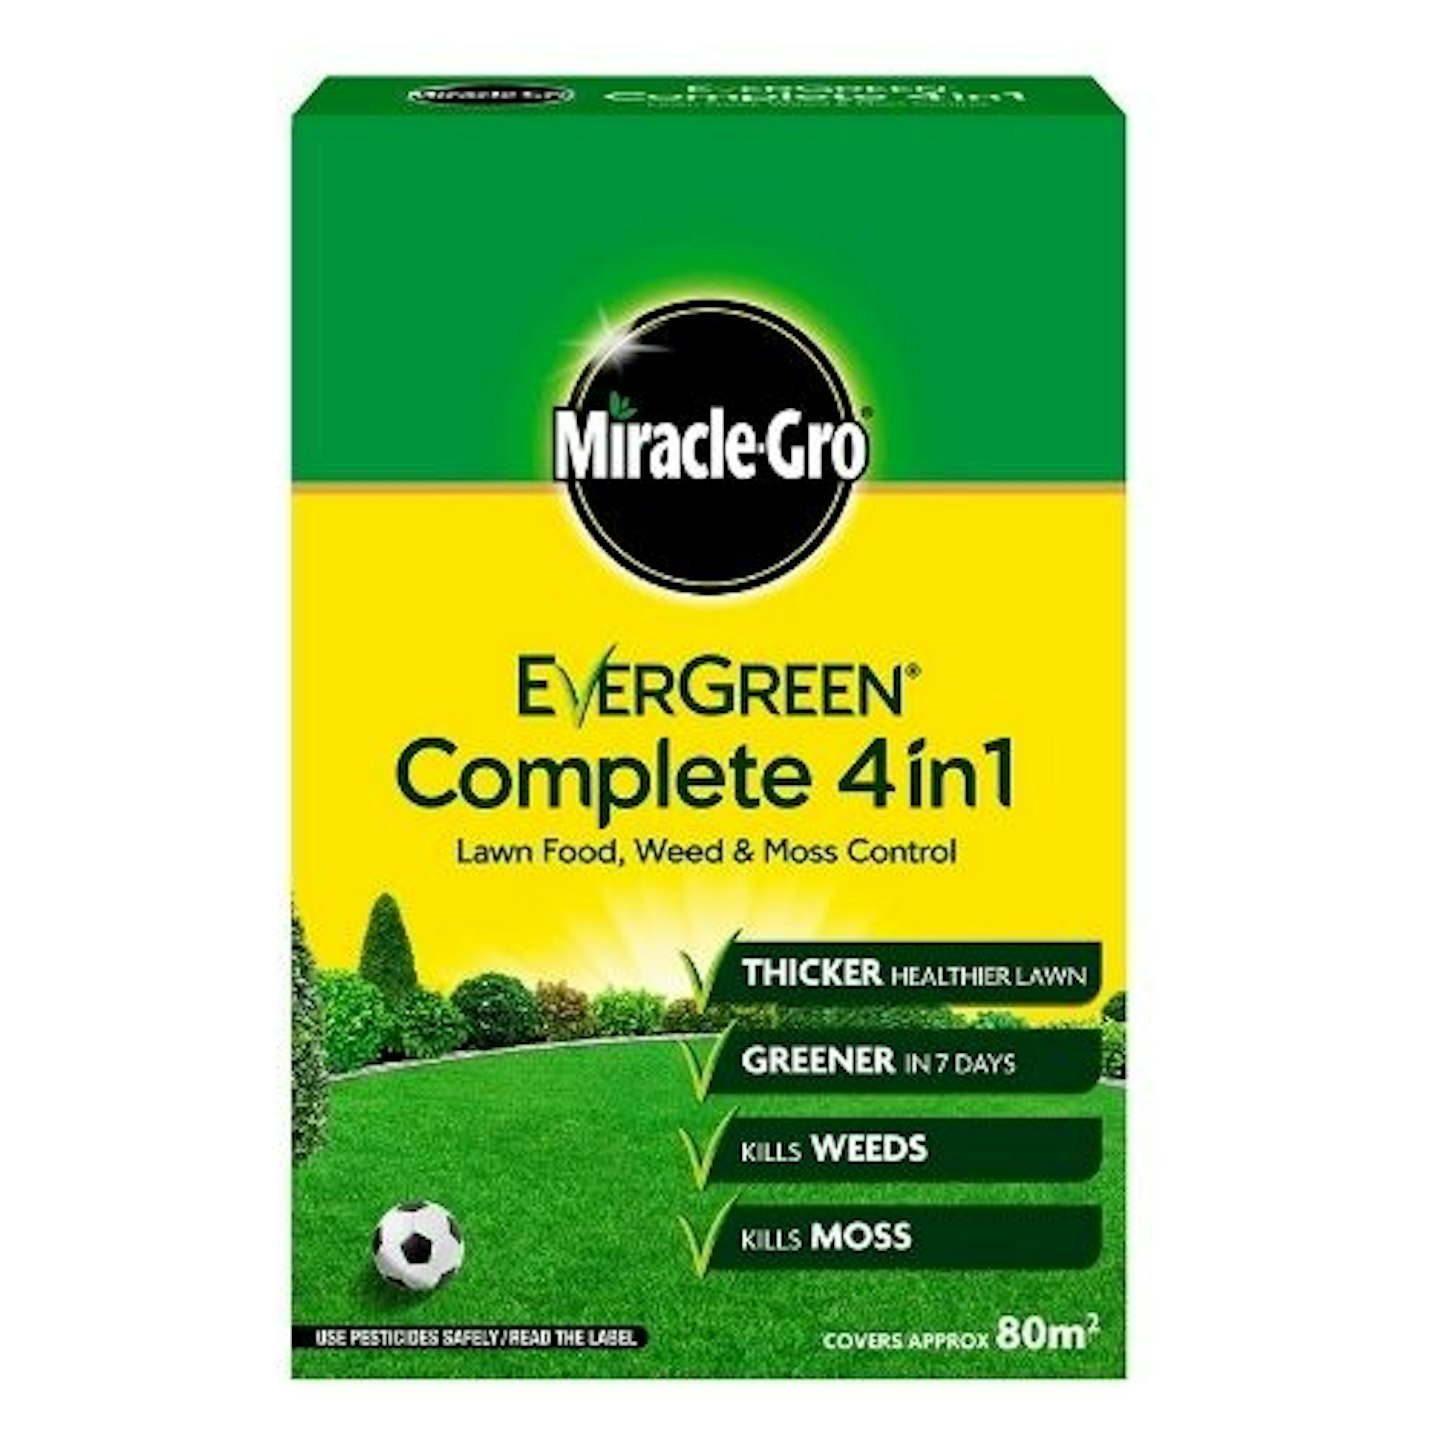 Miracle-Gro EverGreen Complete 4in1